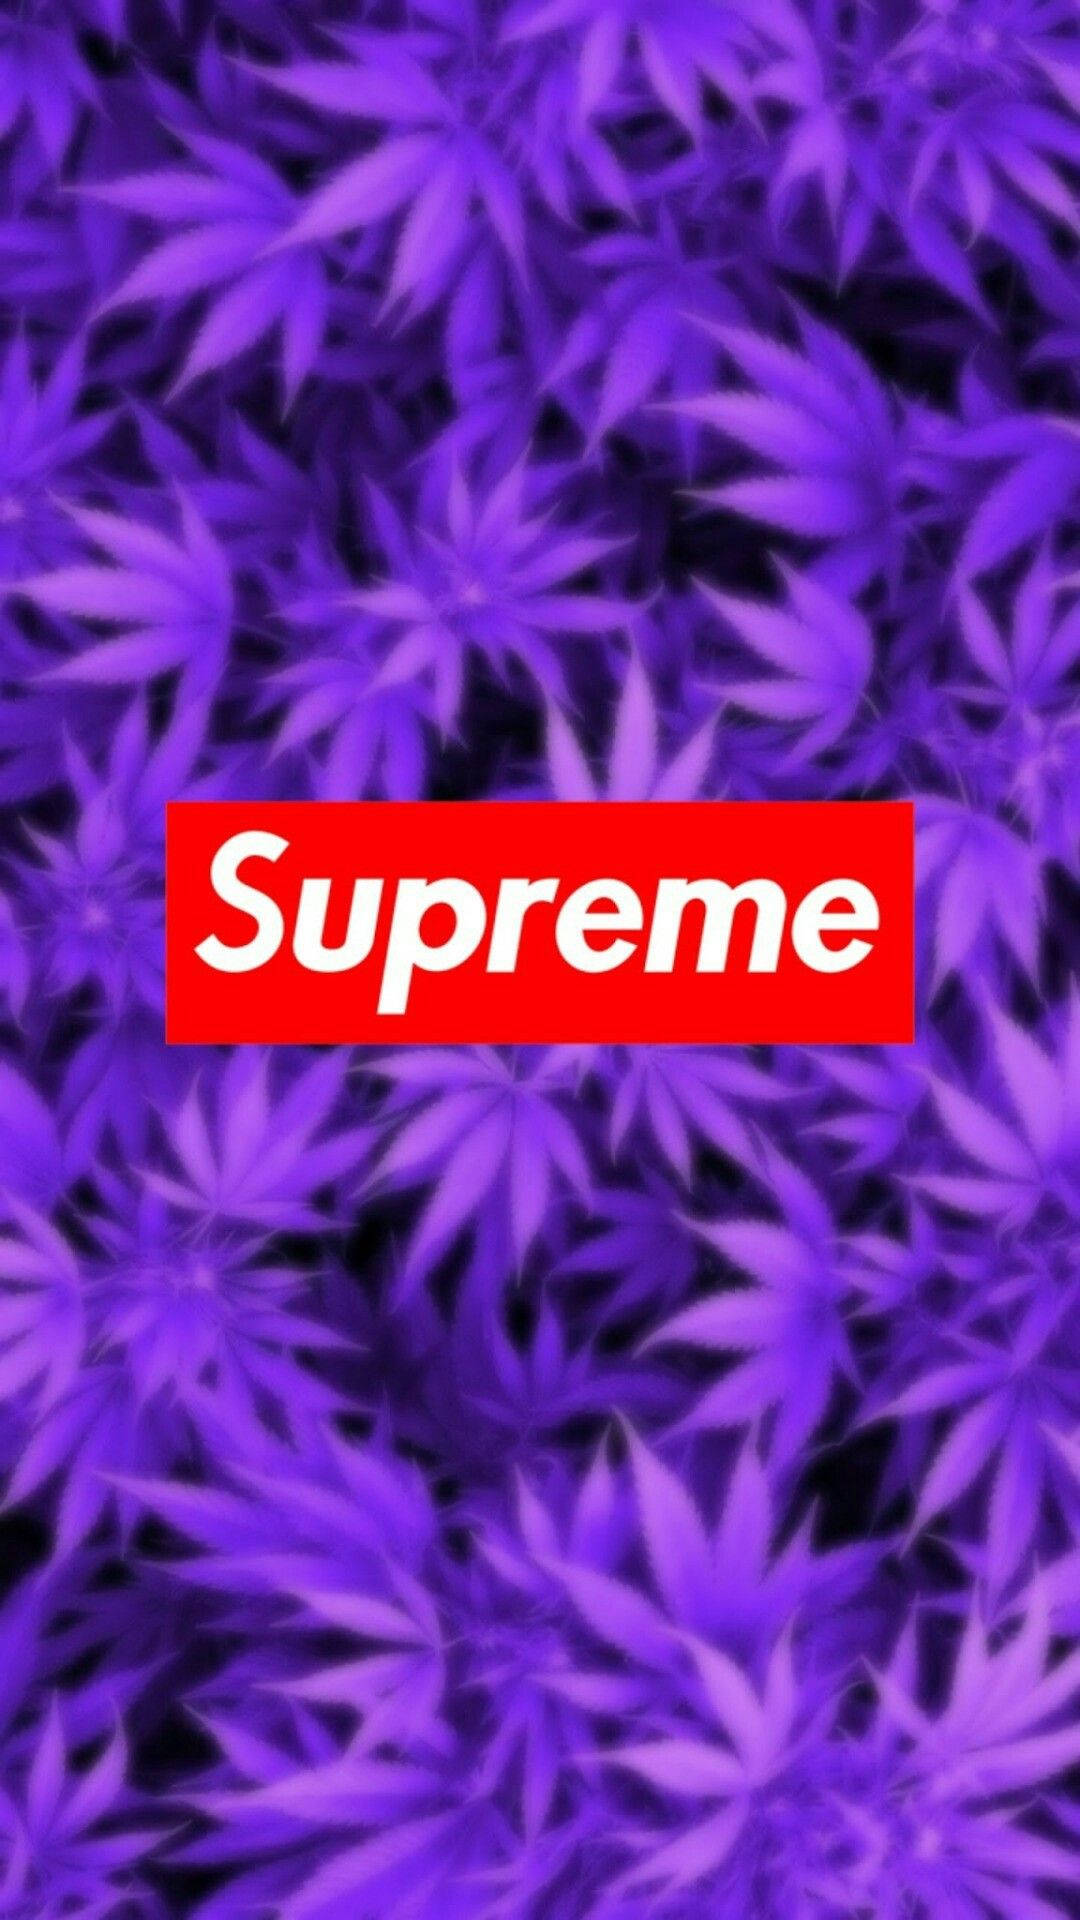 100+] Supreme Iphone Wallpapers